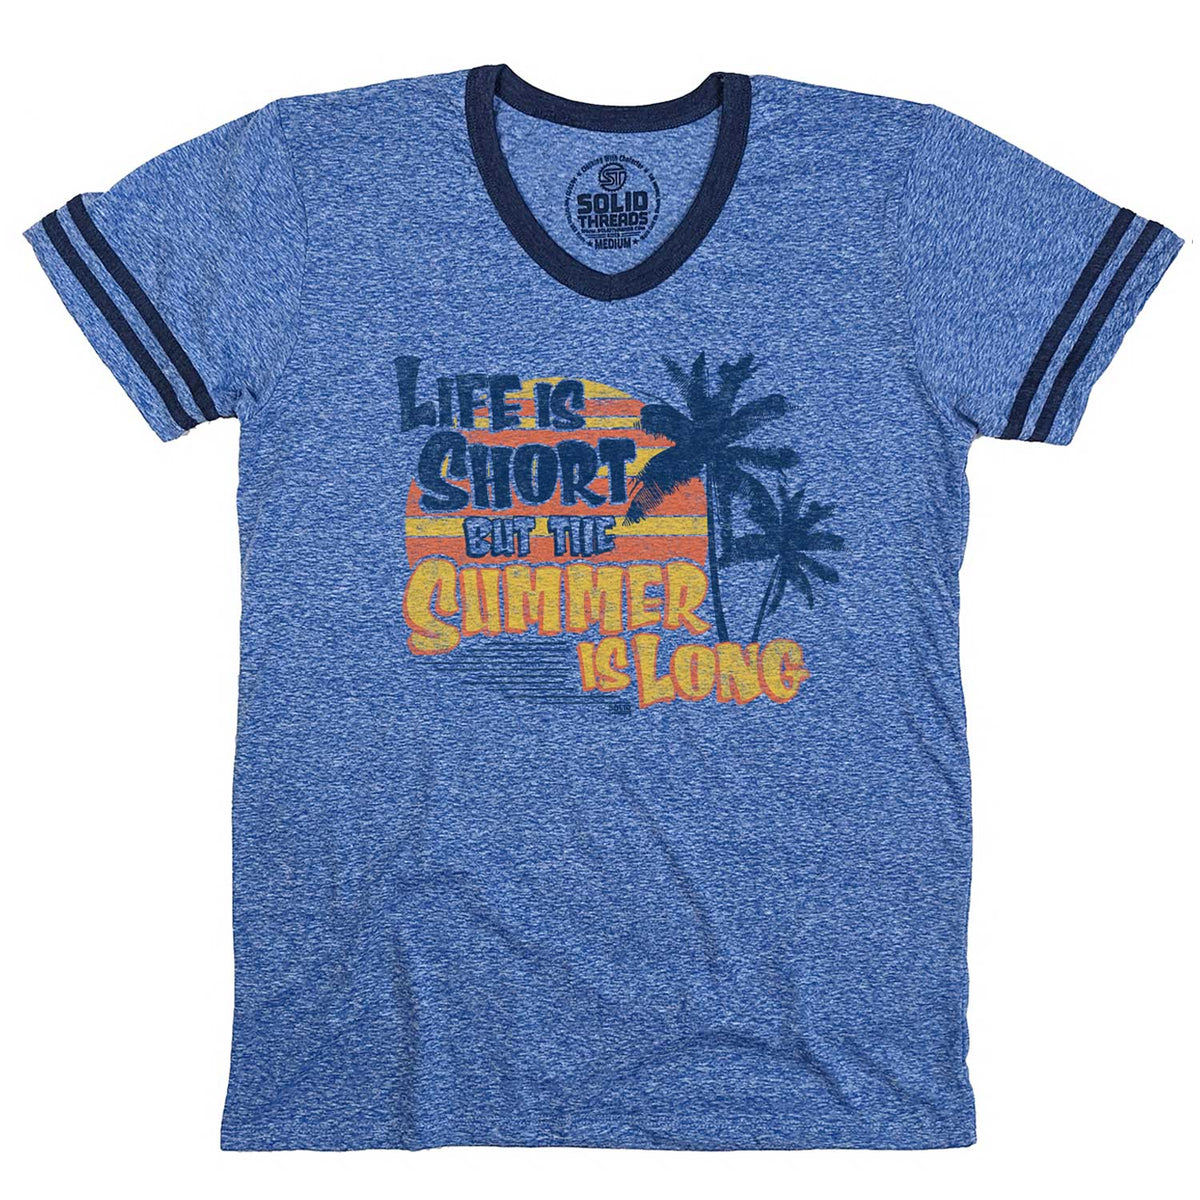 Men&#39;s Life is Short But the Summer is Long Cool Graphic V-neck | Retro Beach T-shirt | Solid Threads